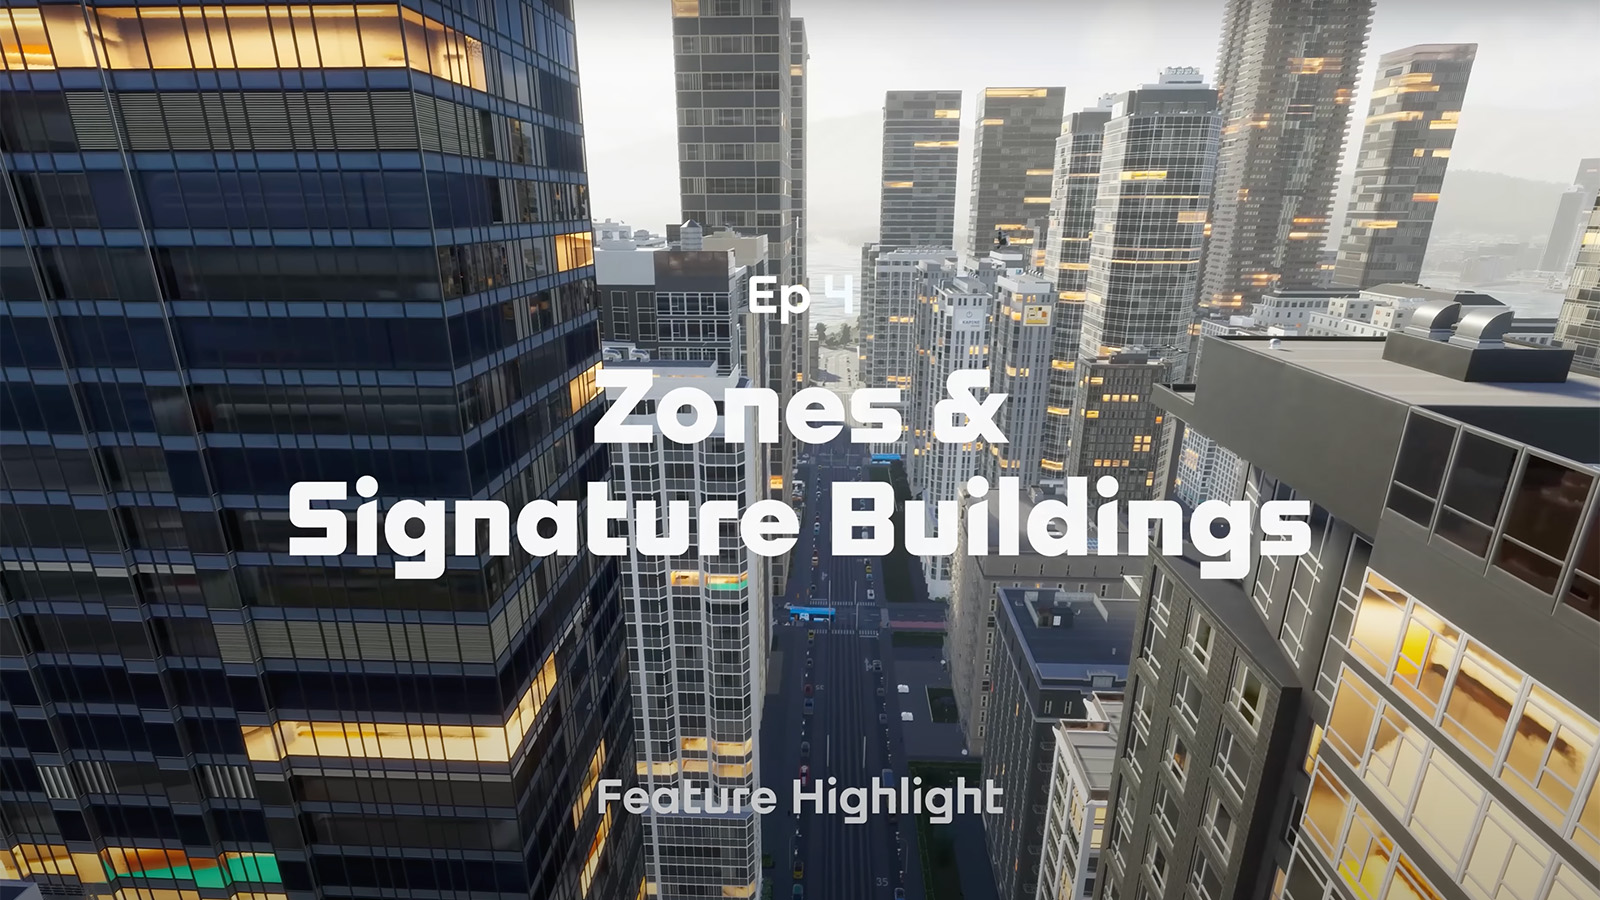 Cities: Skylines Zoning Feature Highlight